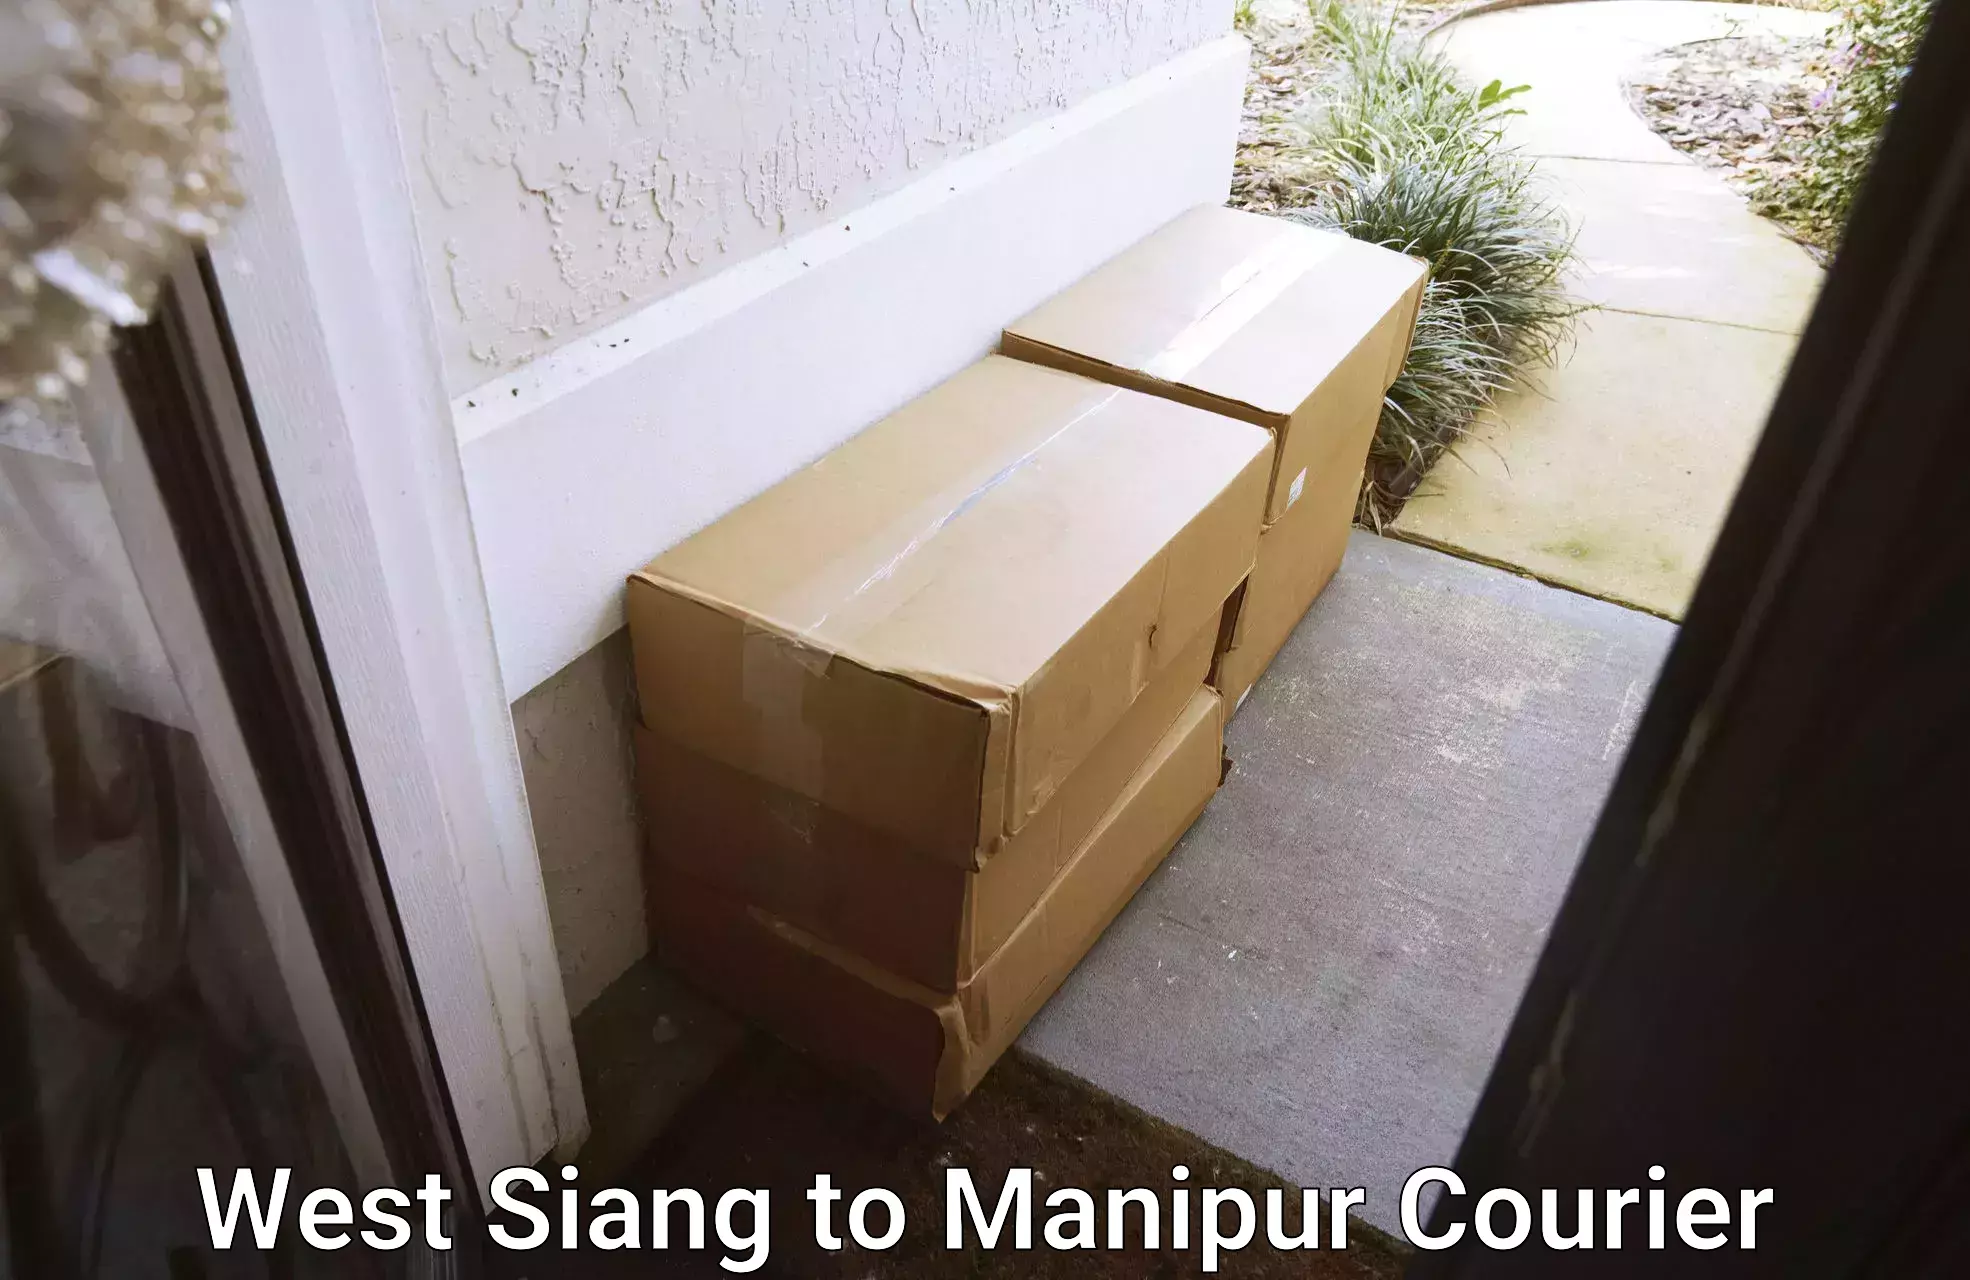 Lightweight parcel options in West Siang to Manipur